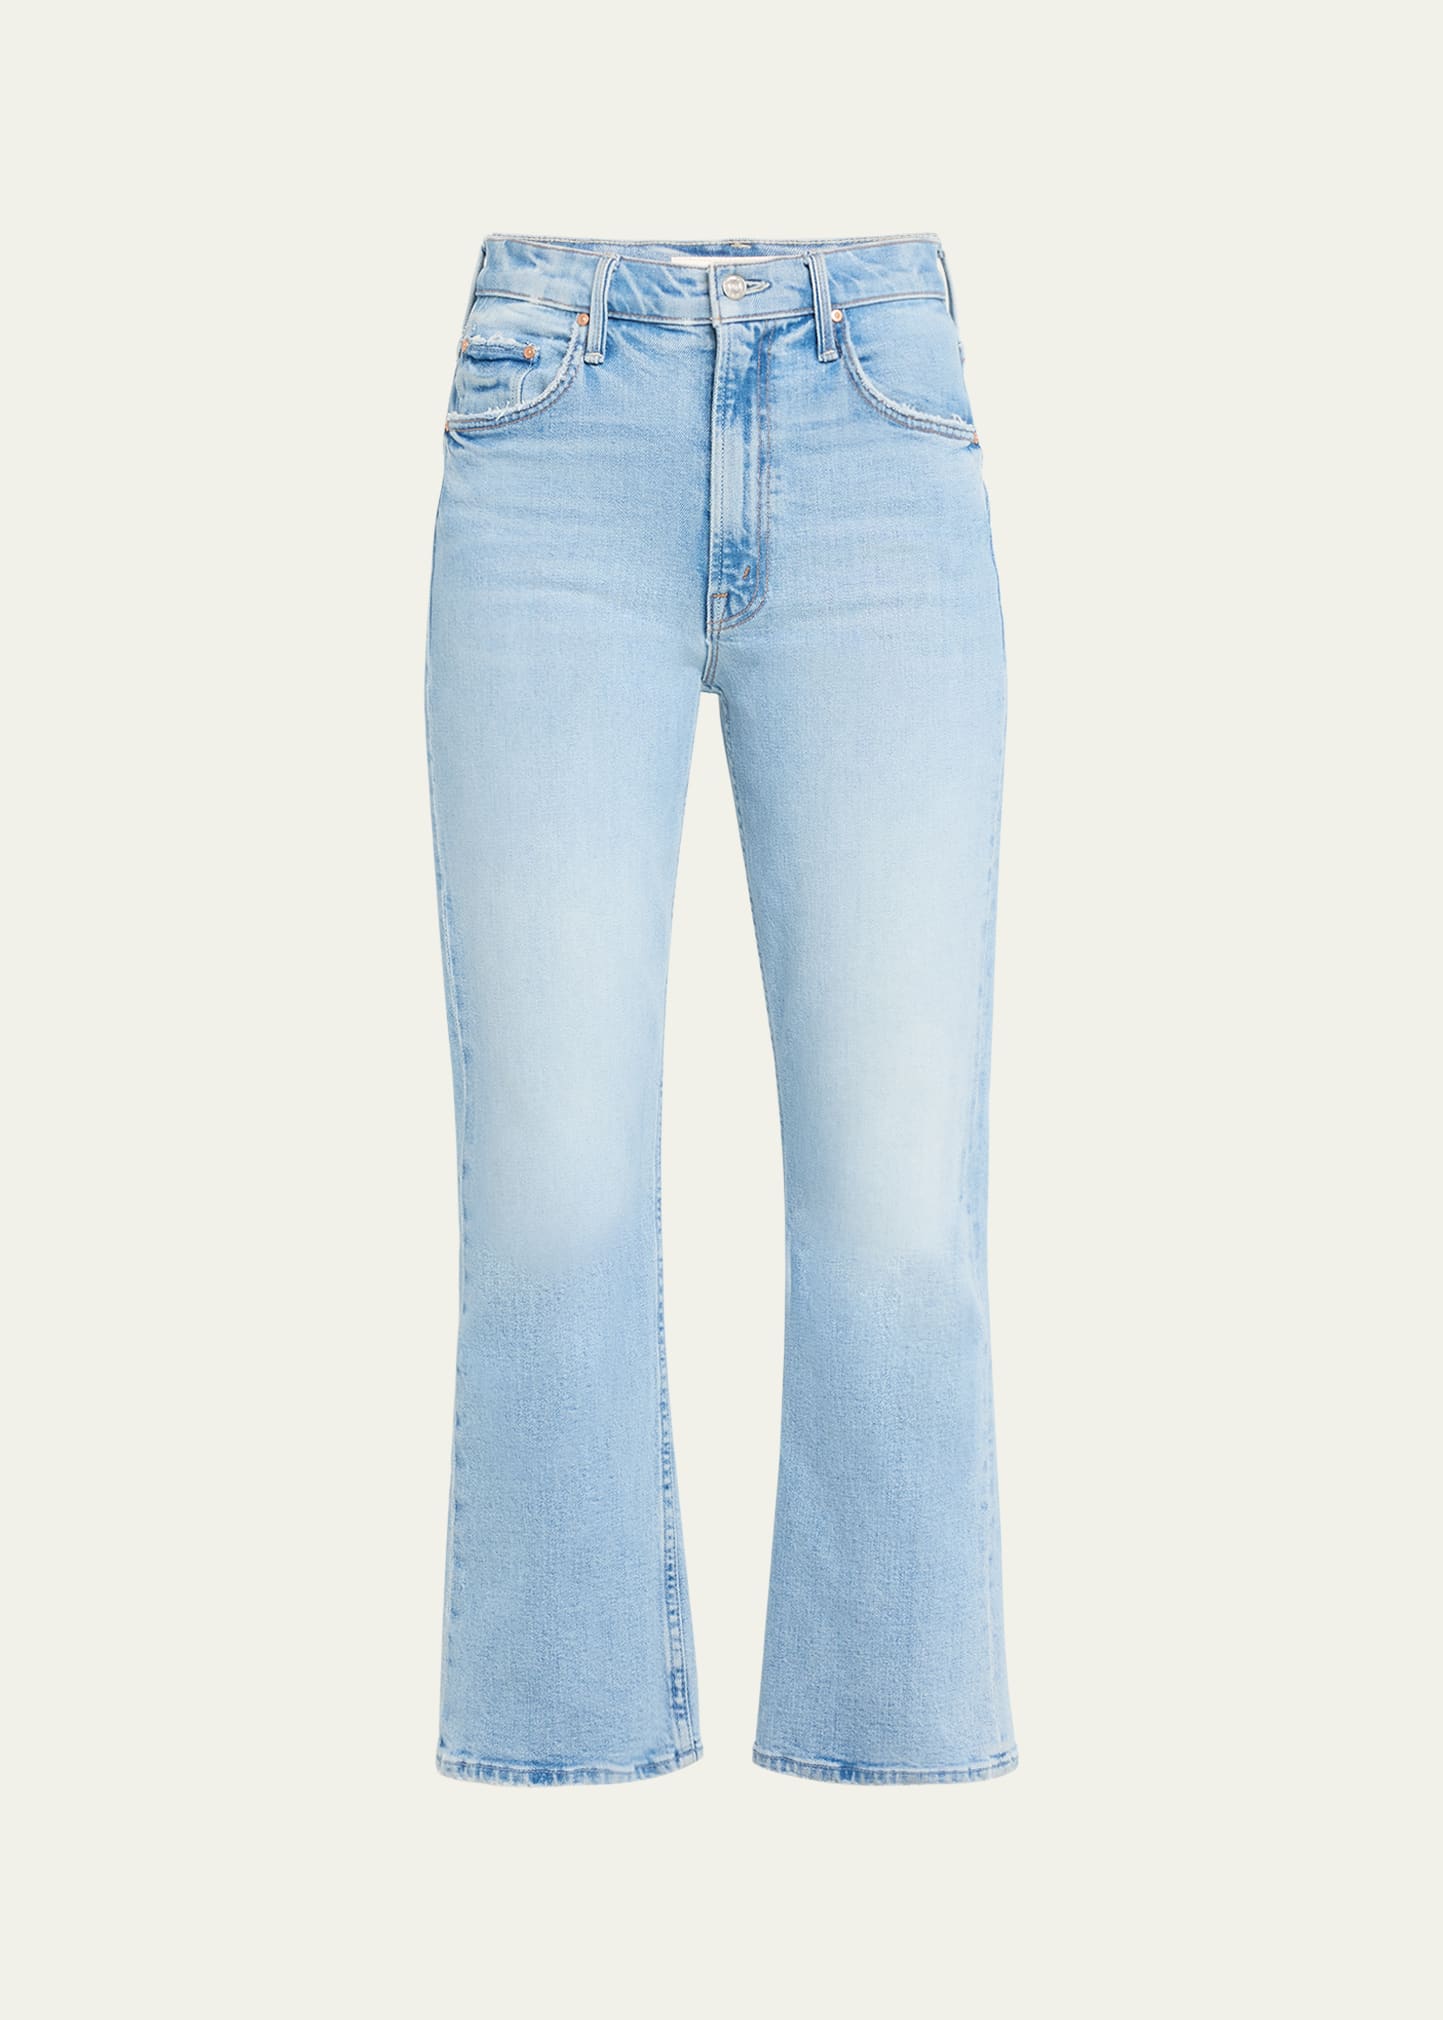 The Scooter Ankle Jeans